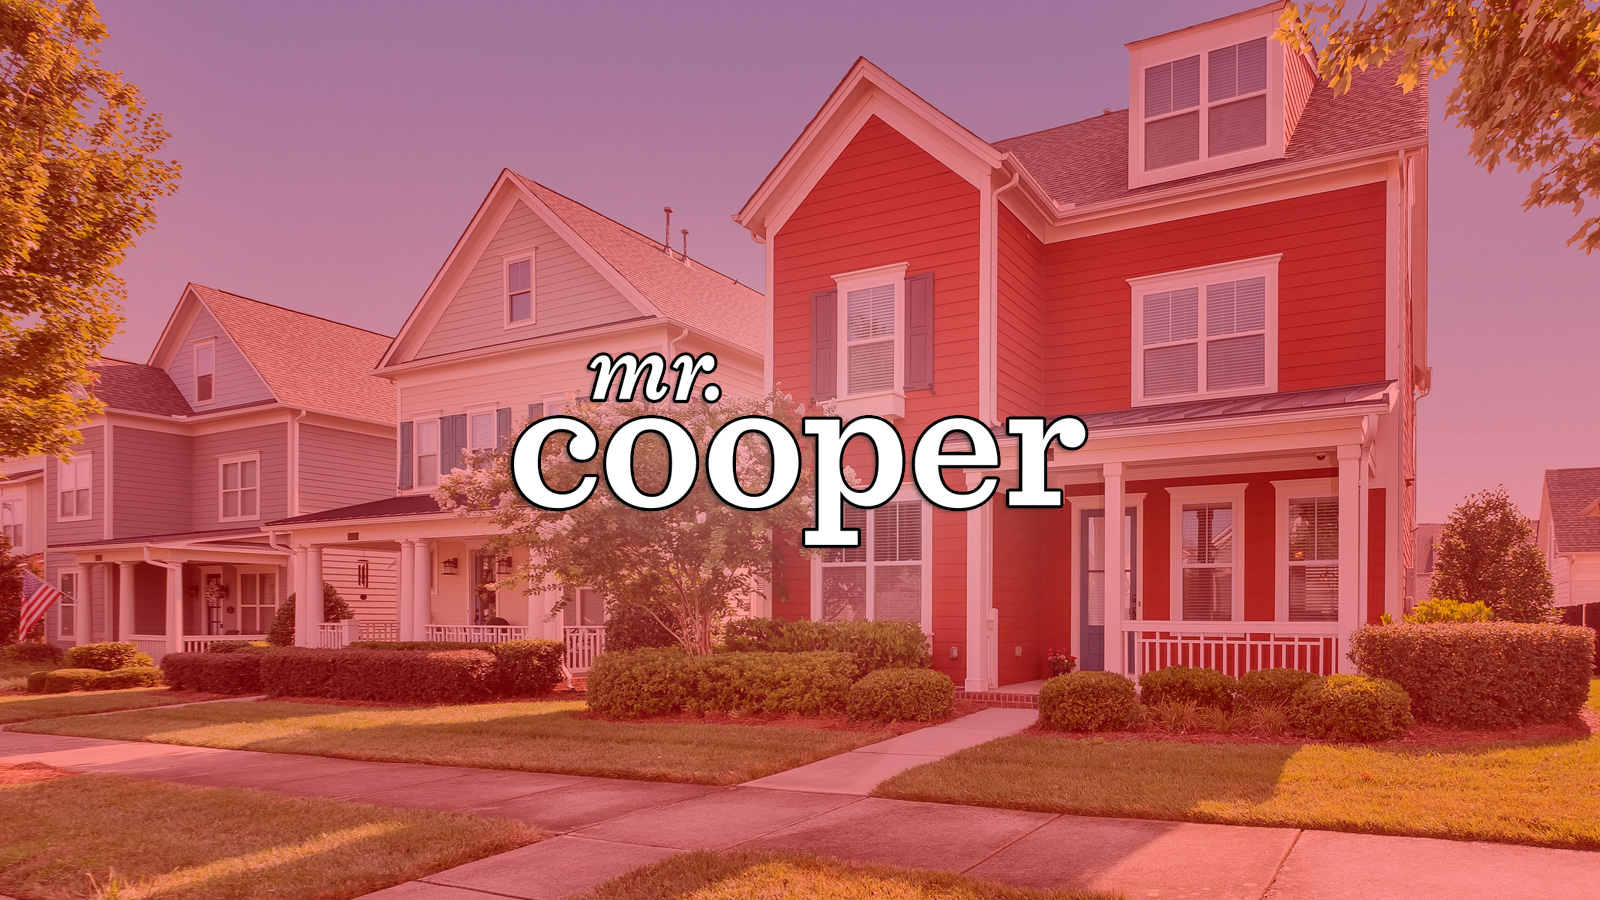 Mortgage lender giant Mr. Cooper hit by cyberattack impacting IT systems